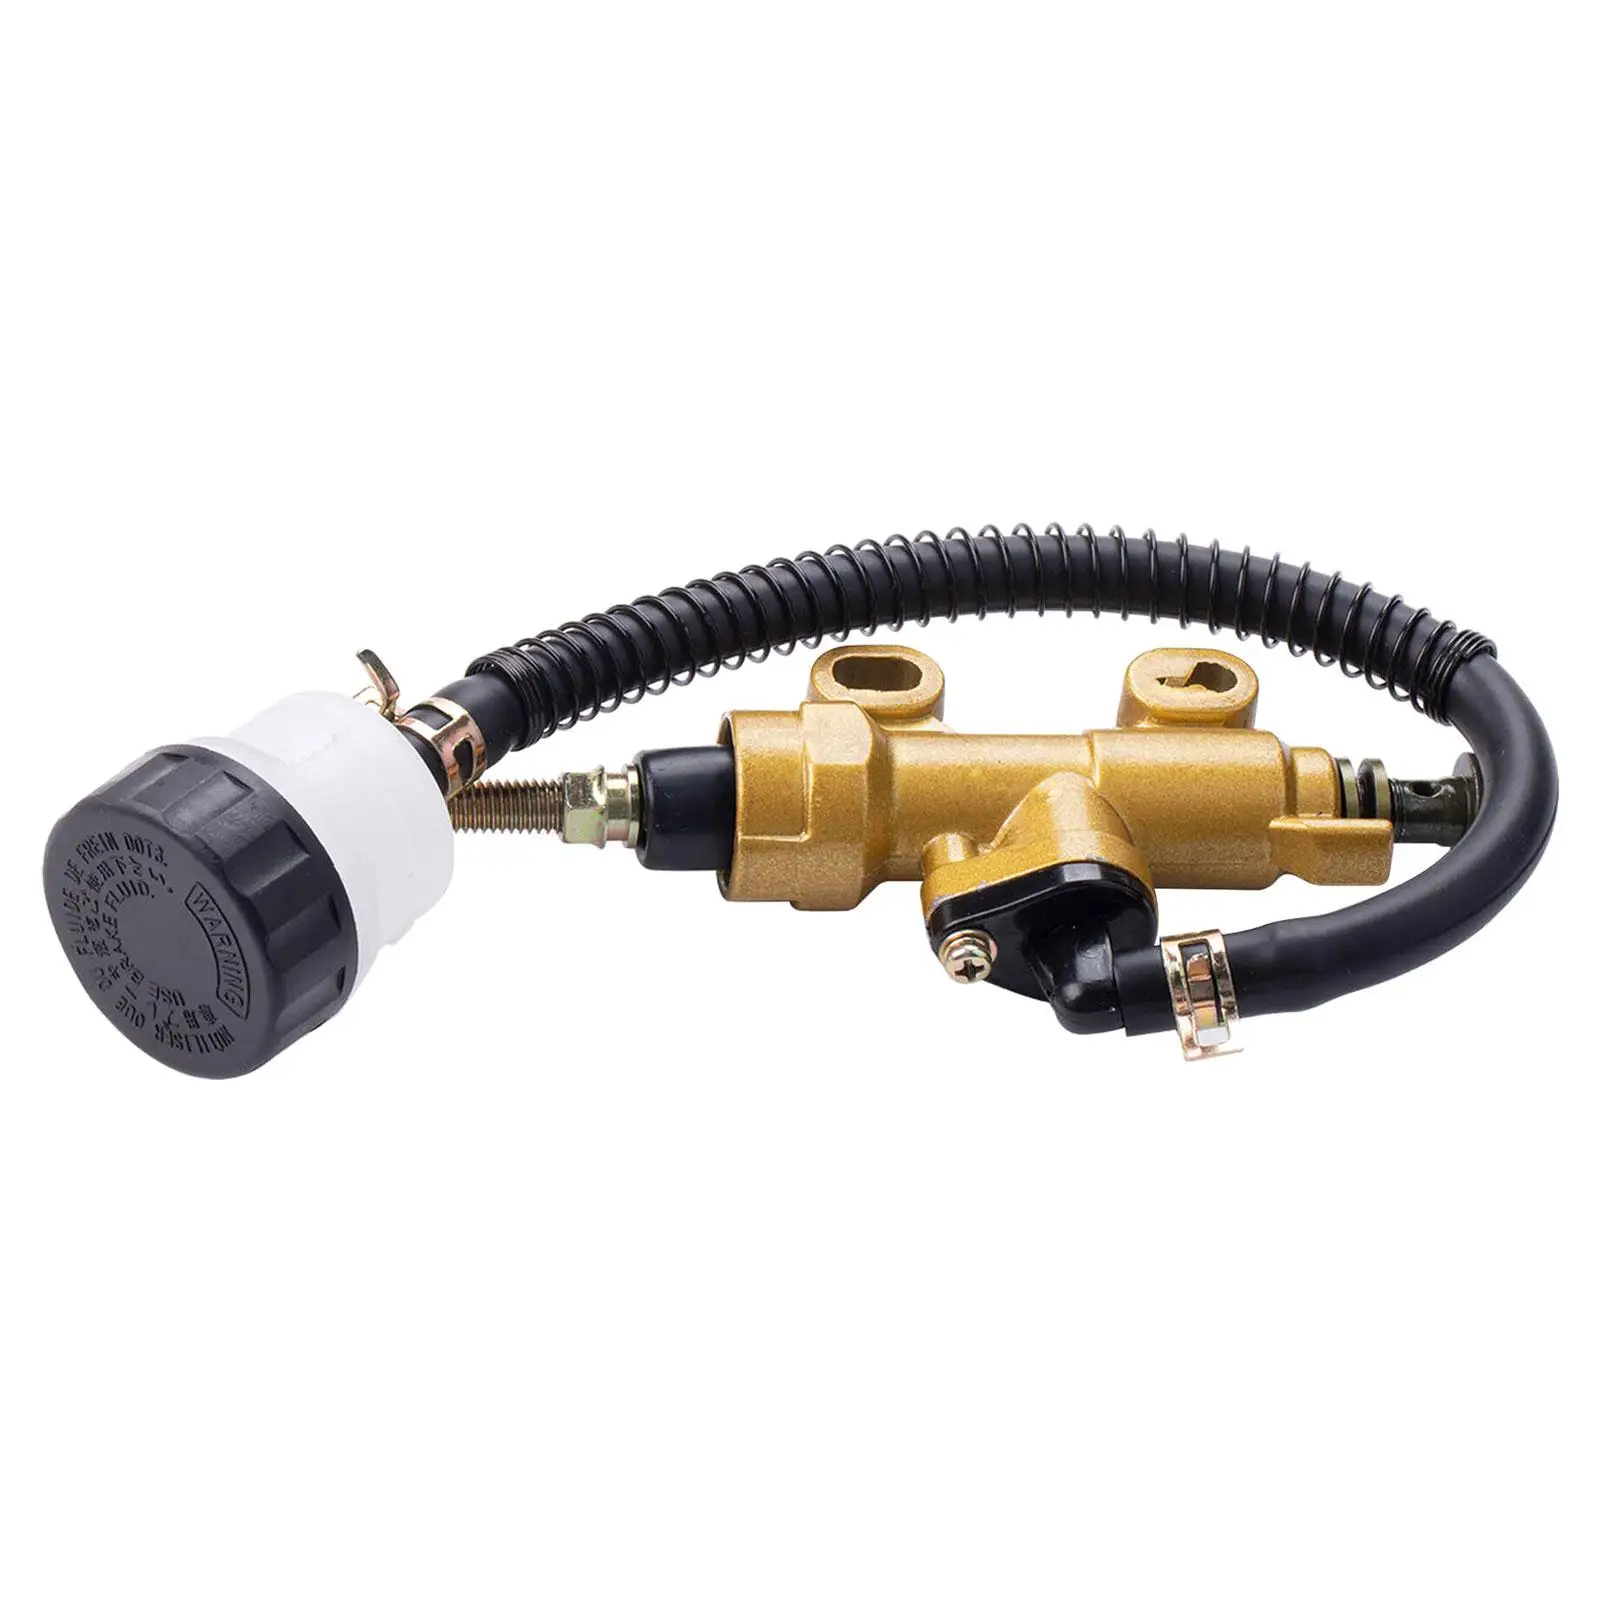 Motorcycle Rear Foot Master Cylinder Brake Pump ,Aluminum Alloy for CBR250 400 600 1000 ATV Stable